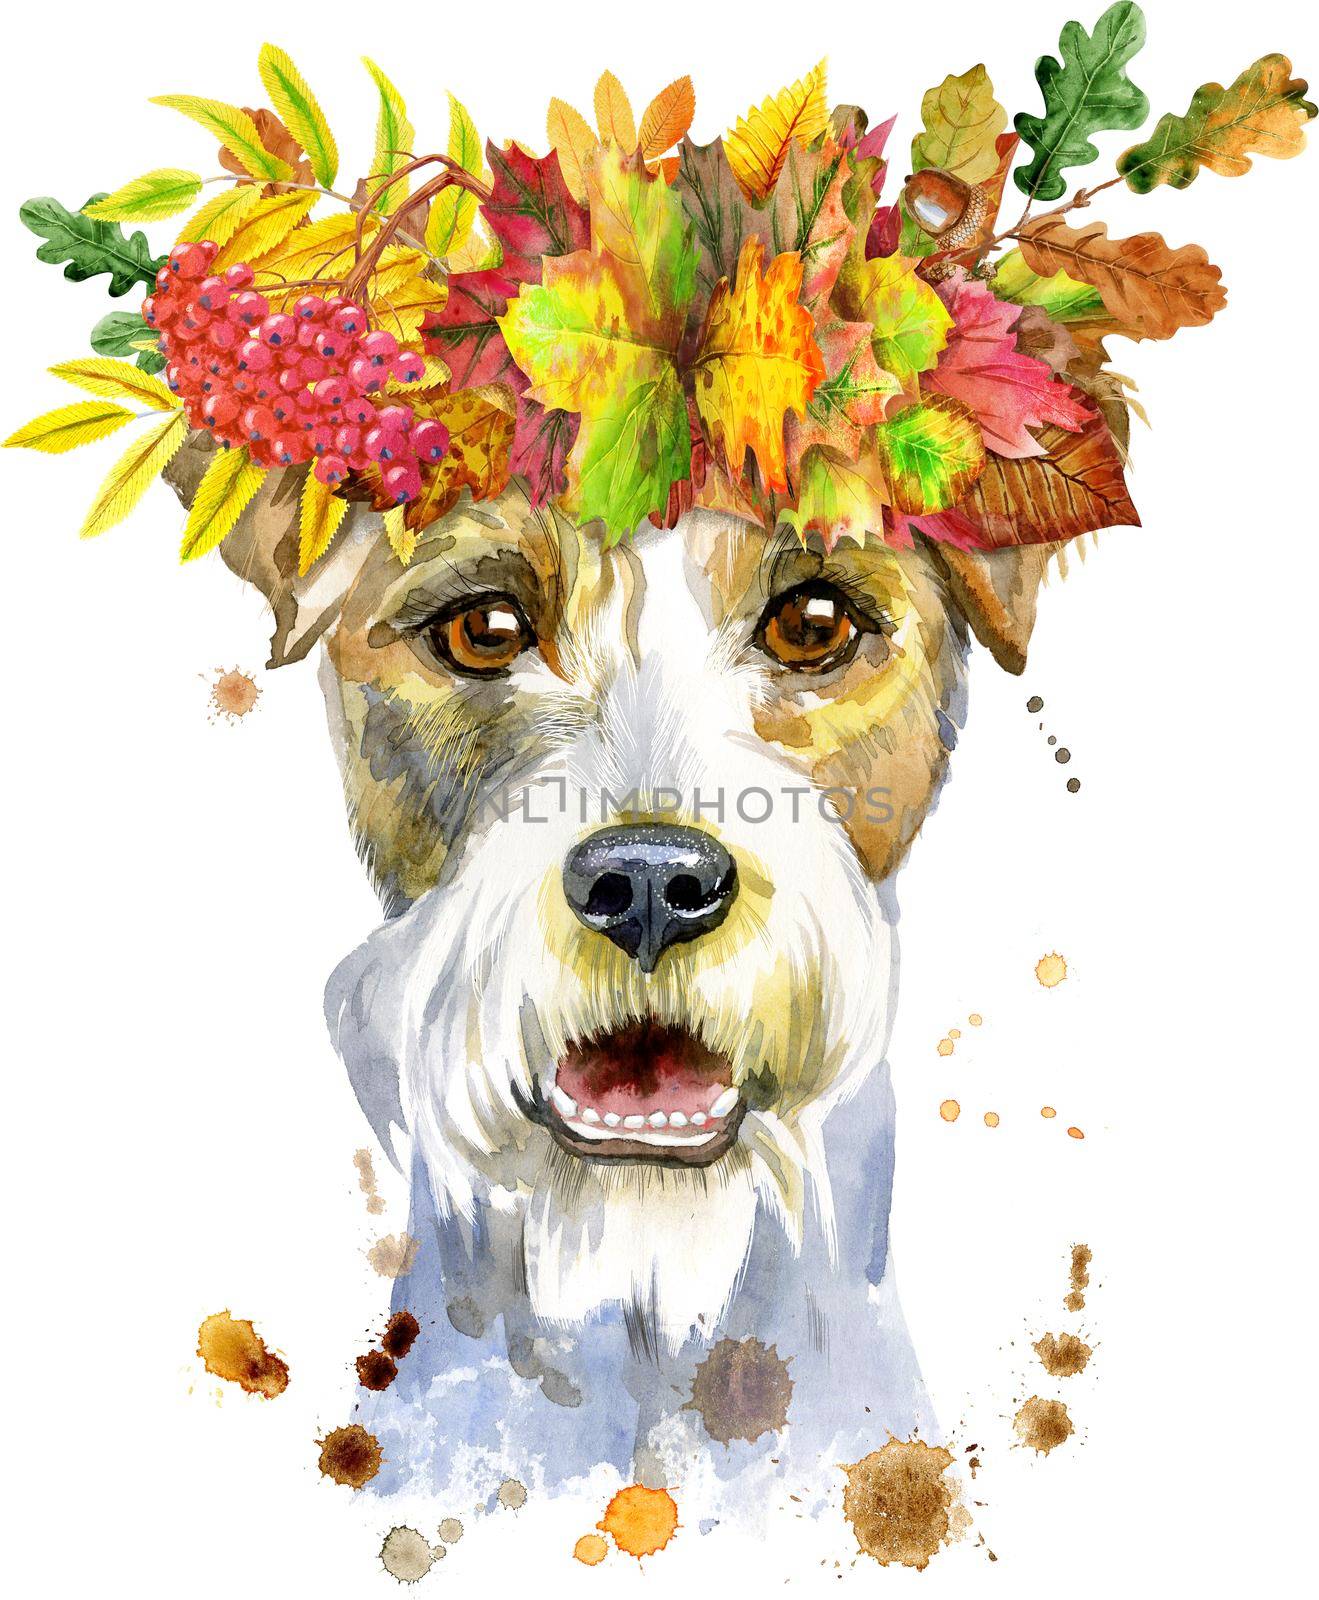 Cute Dog in a wreath of autumn leaves. Dog T-shirt graphics. watercolor airedale terrier illustration